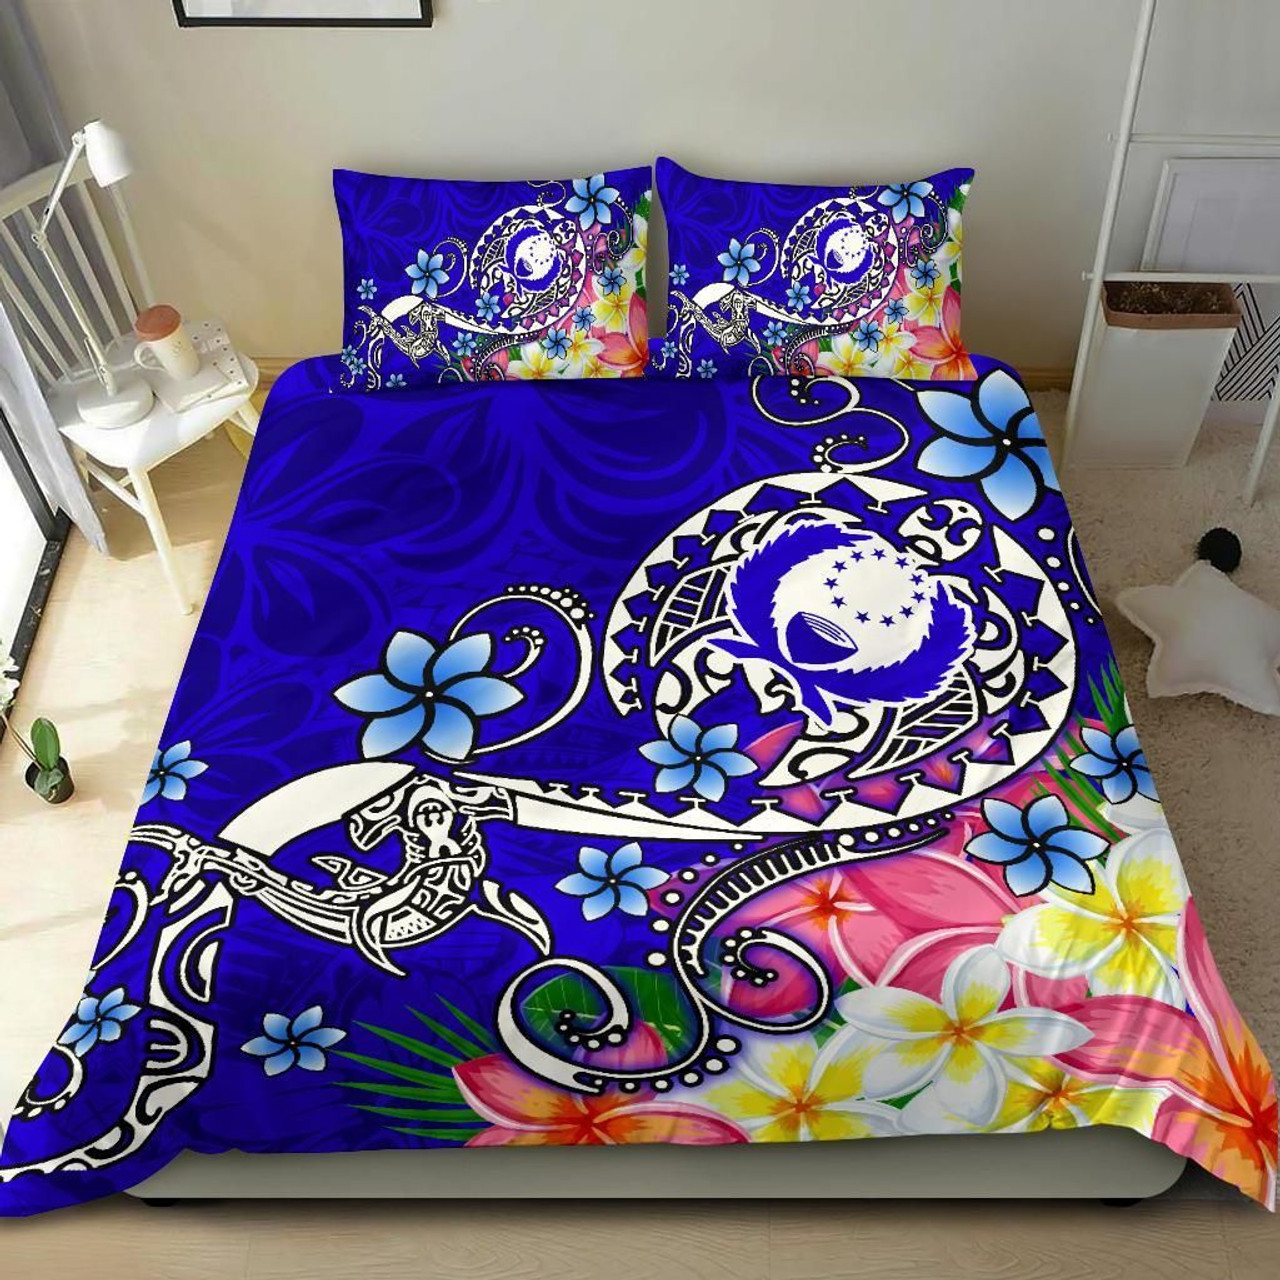 Yap State Bedding Set - Flowers Tropical With Sea Animals 5